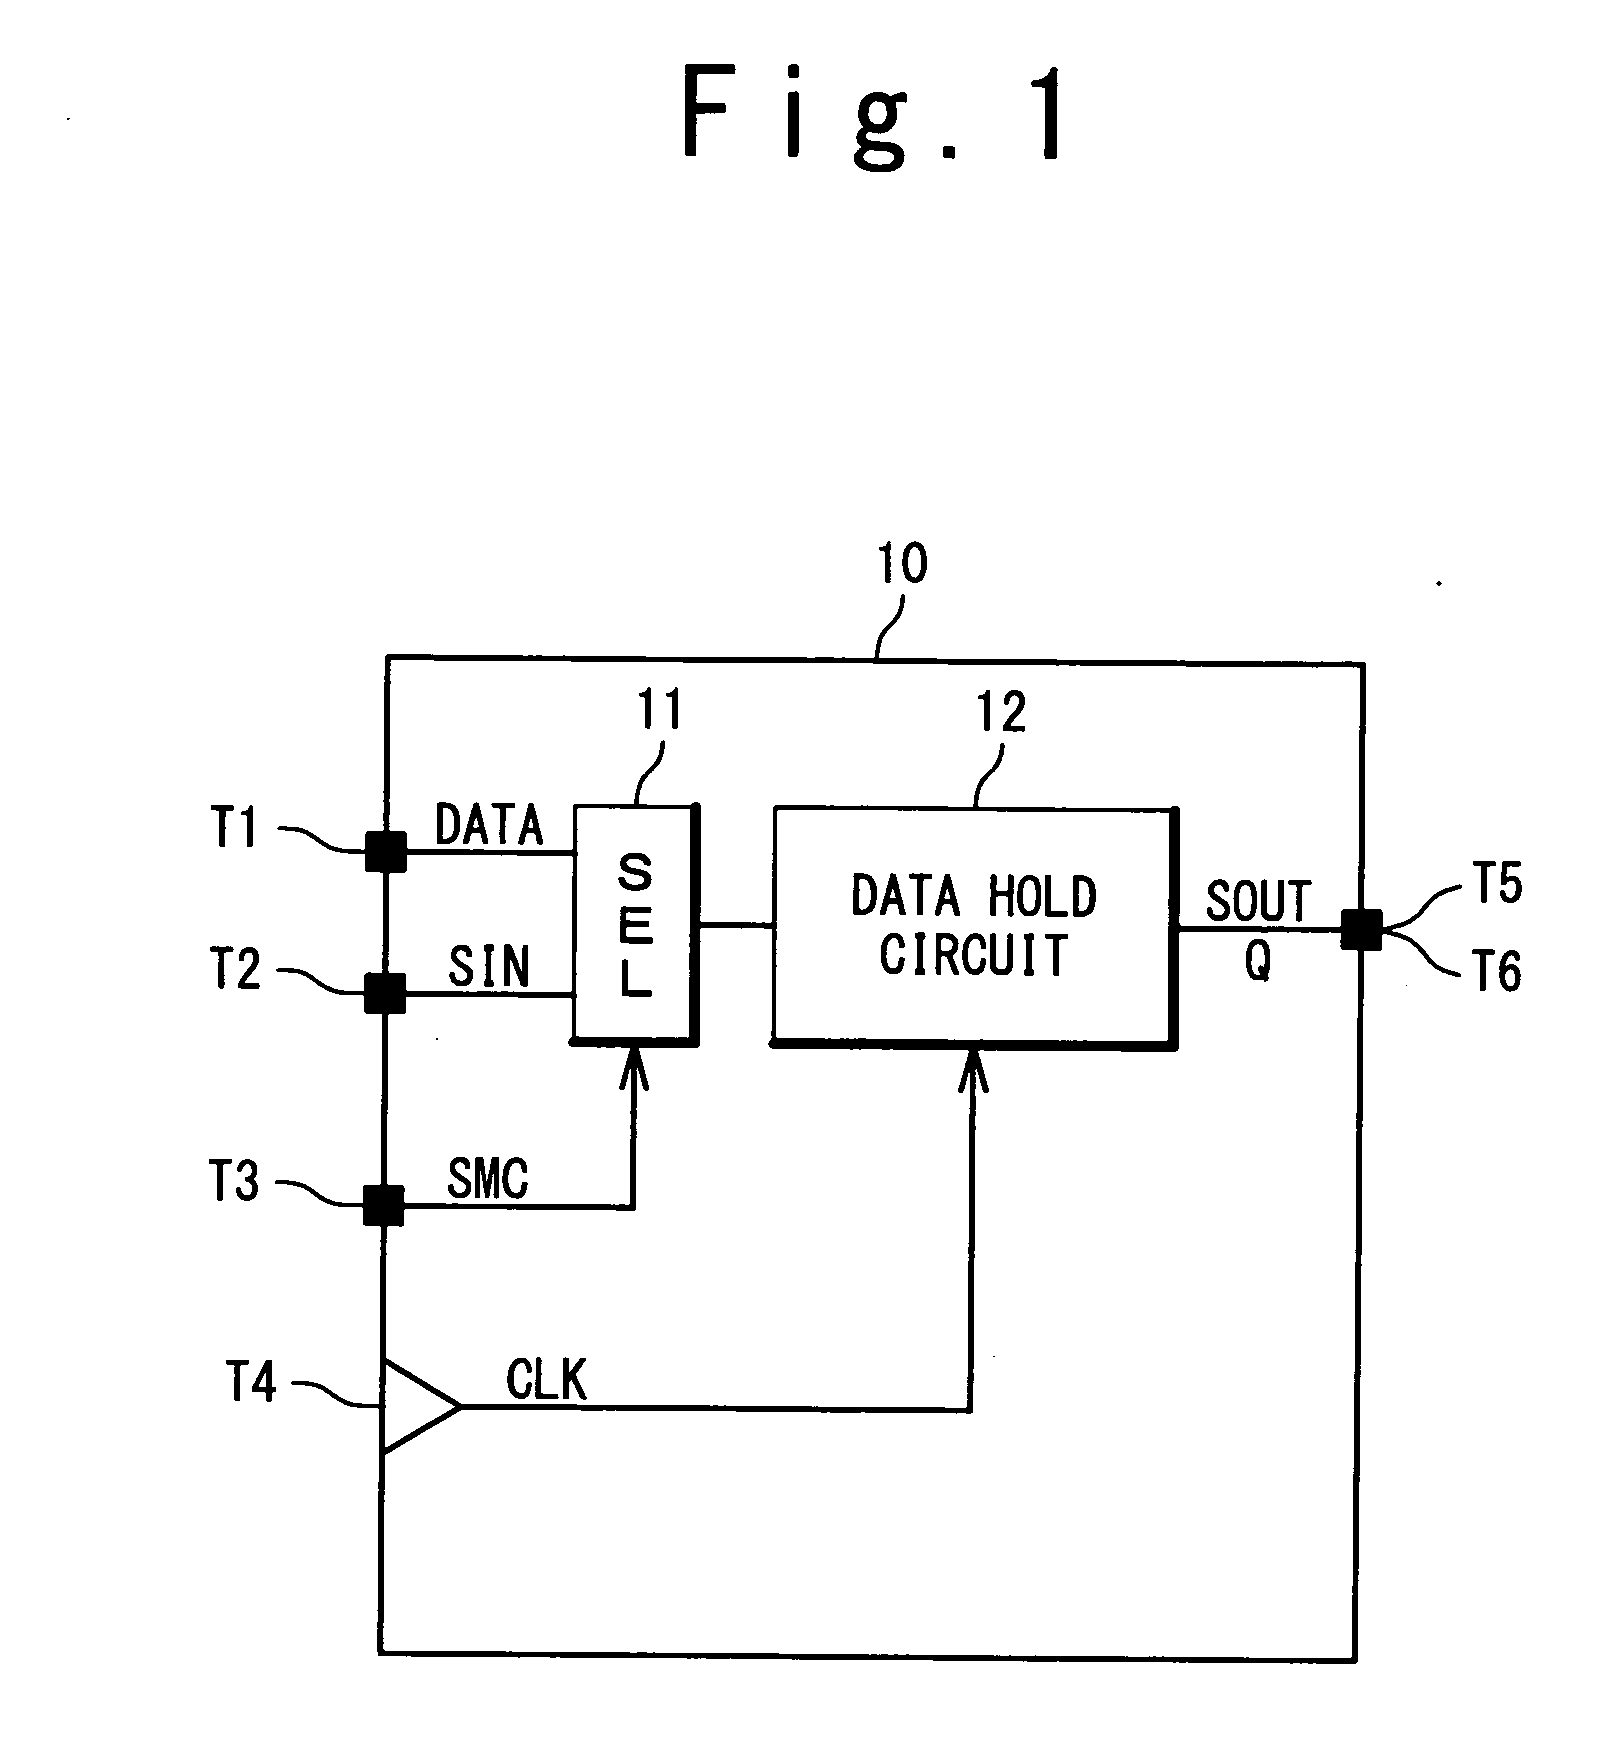 Integrated circuit design based on scan design technology